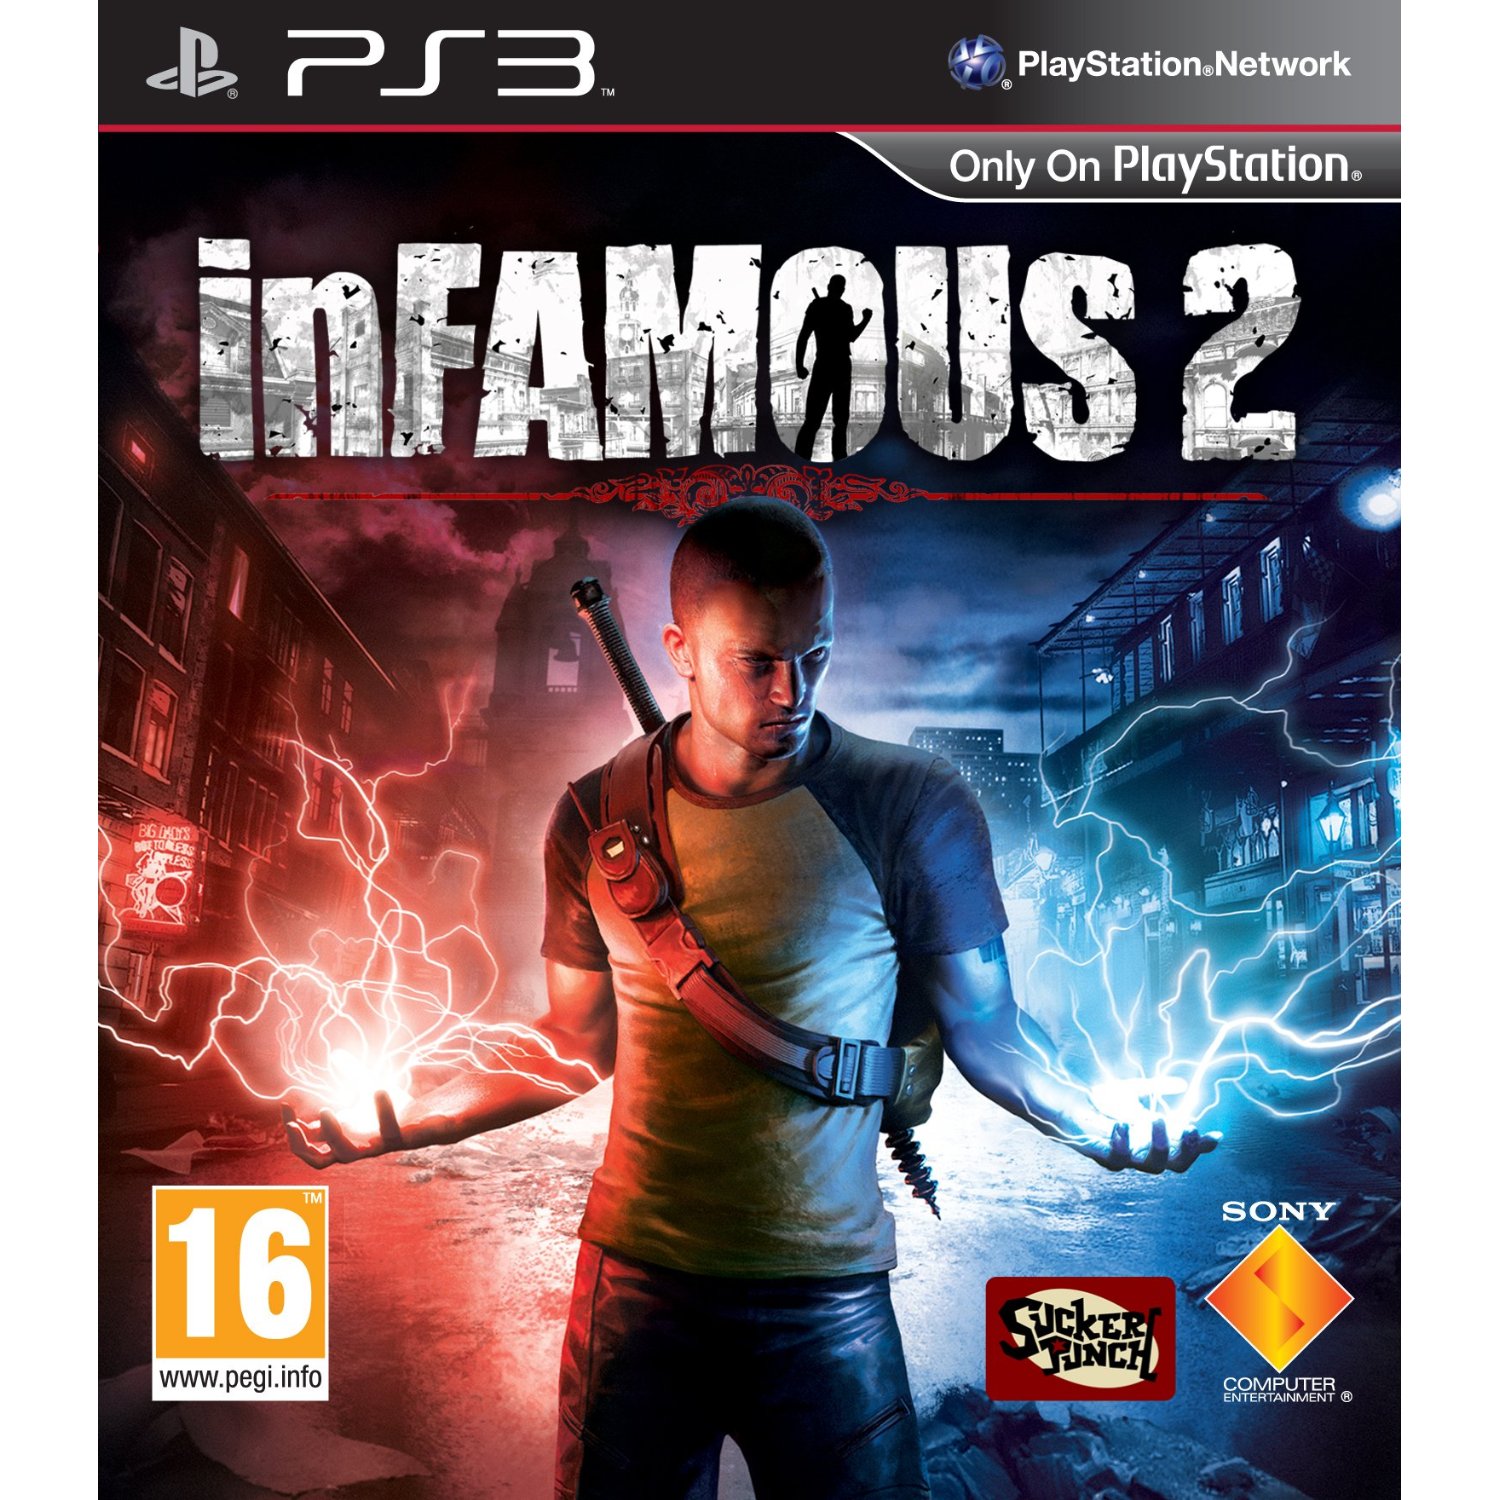 ps3 game cover art